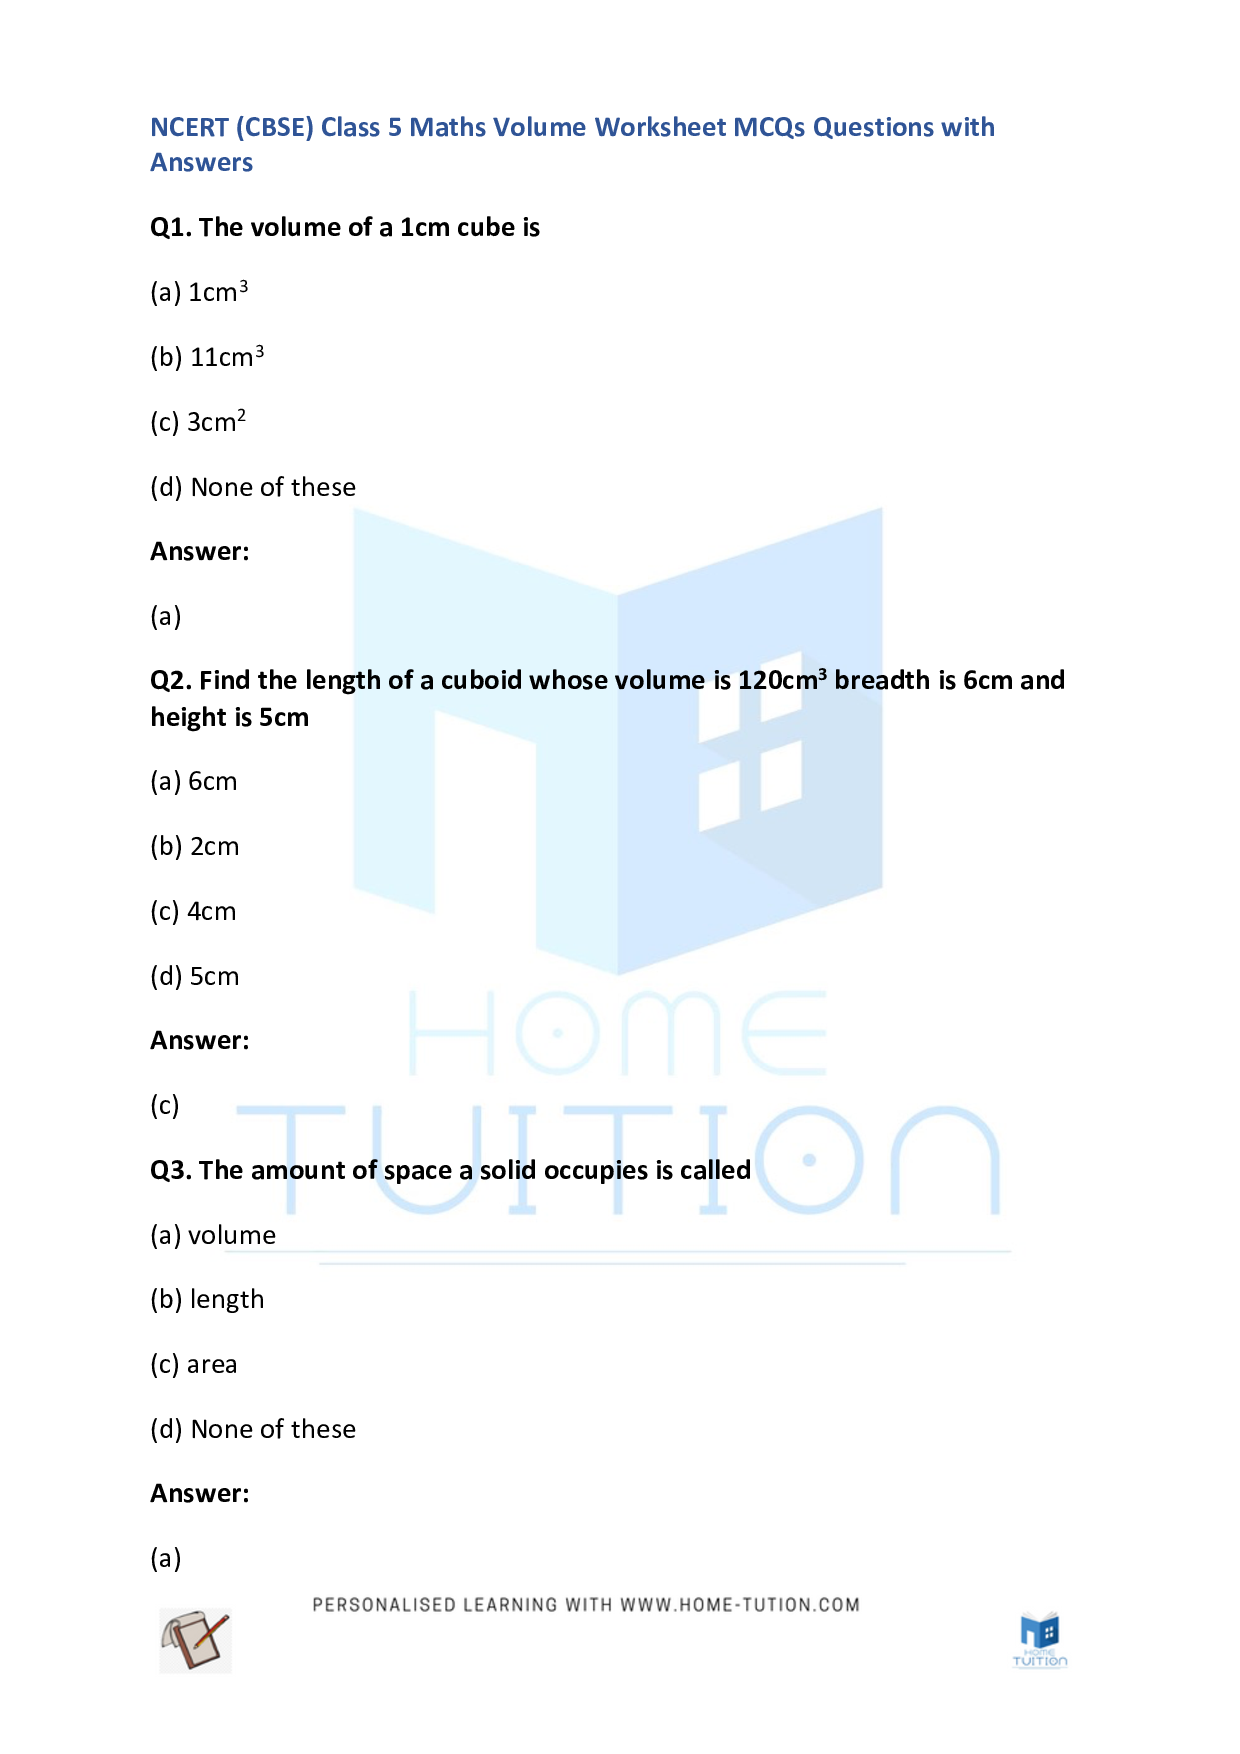 CBSE Class 5 Maths Volume Worksheet with Answers PDF 